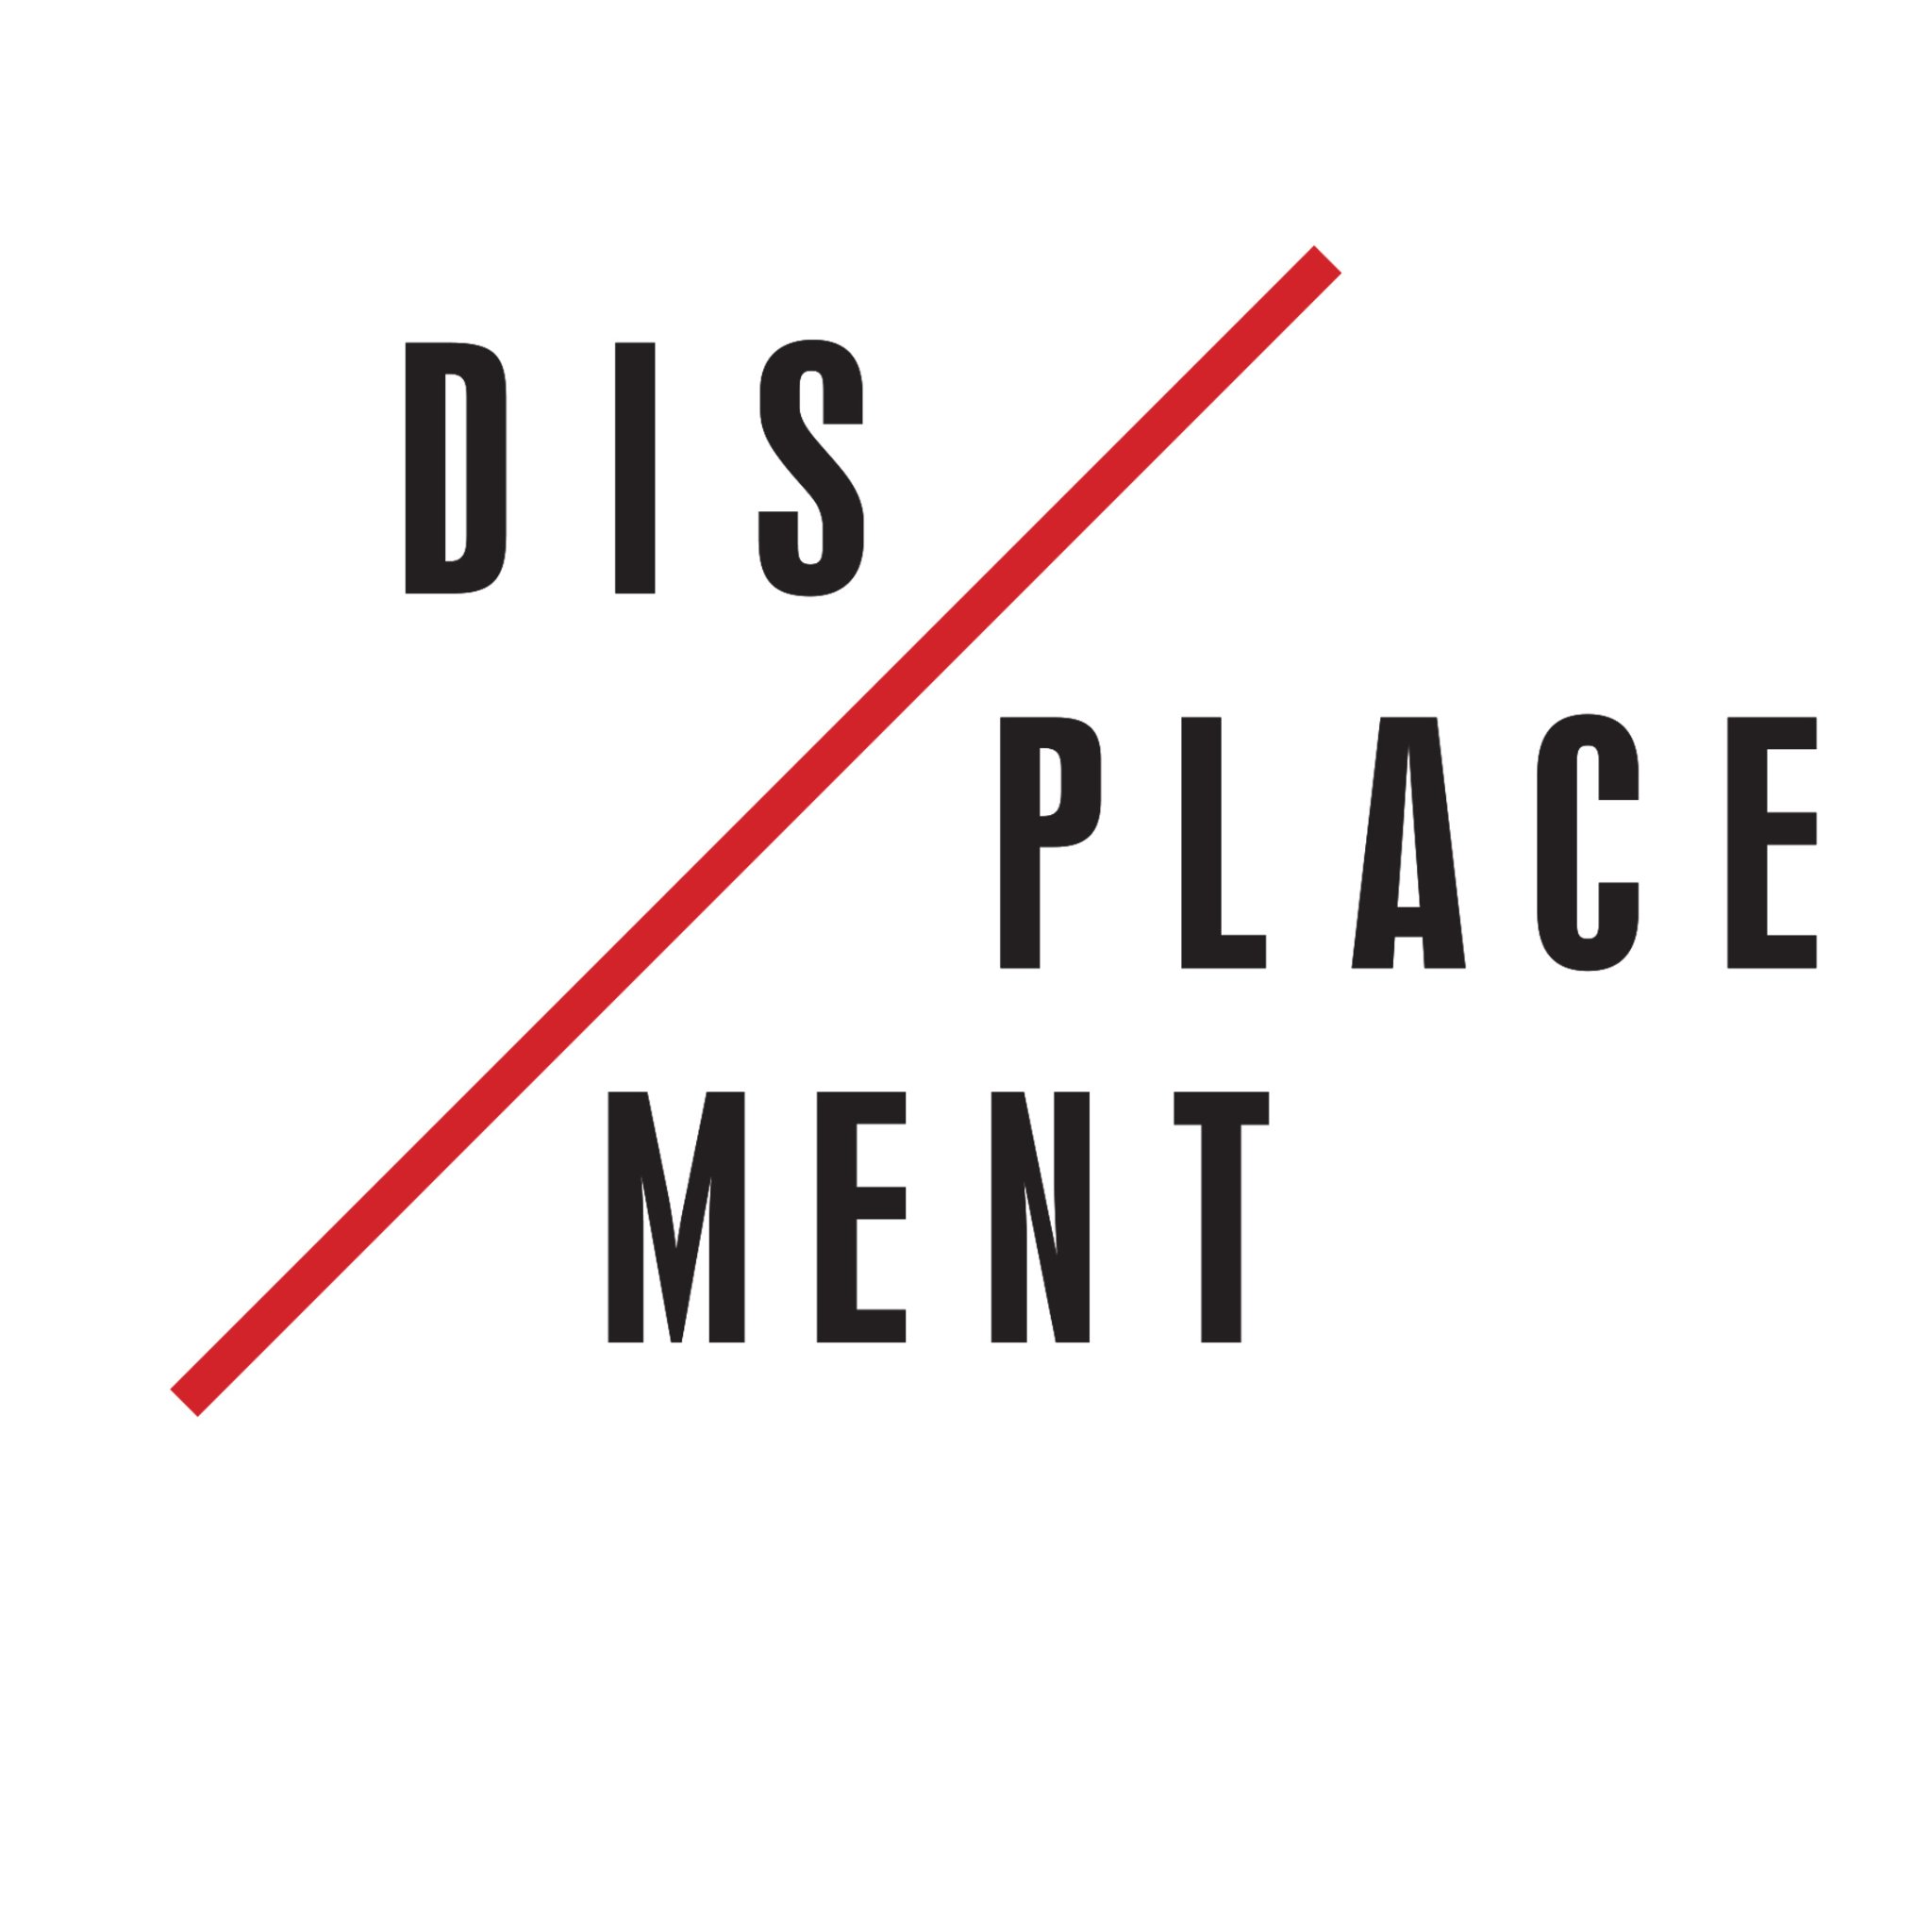 DISPLACEMENT brings art research and practice to bear on international policymaking addressing displacement related to disasters and climate change.